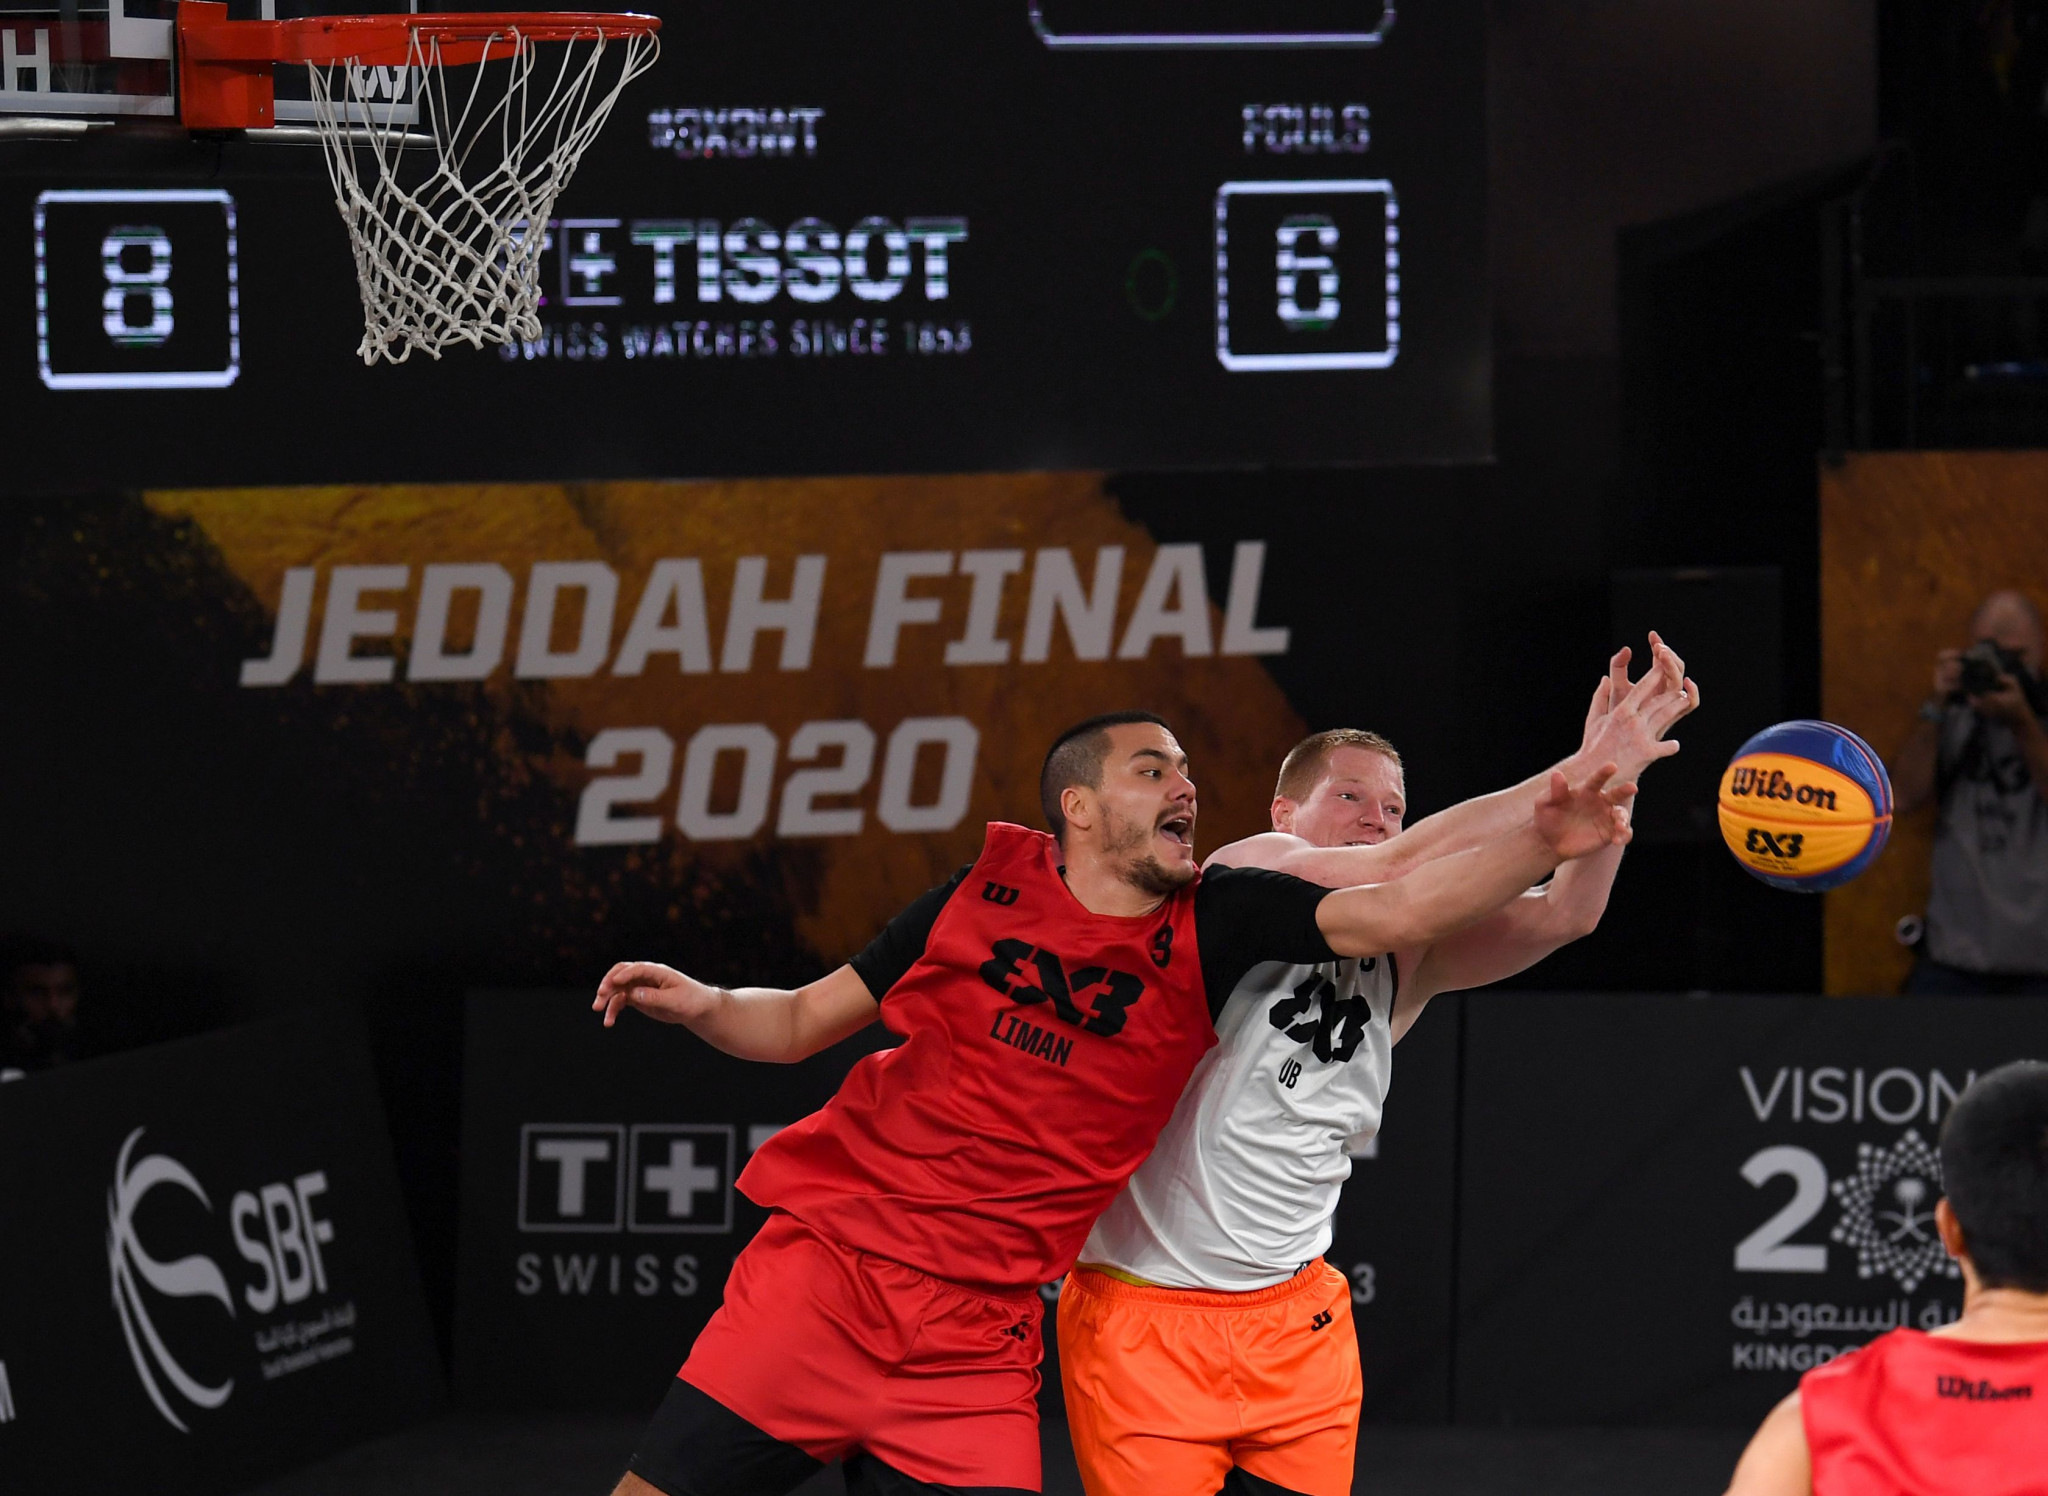 Jeddah is set to return as the host of the FIBA 3x3 World Tour Final in 2021 ©Getty Images